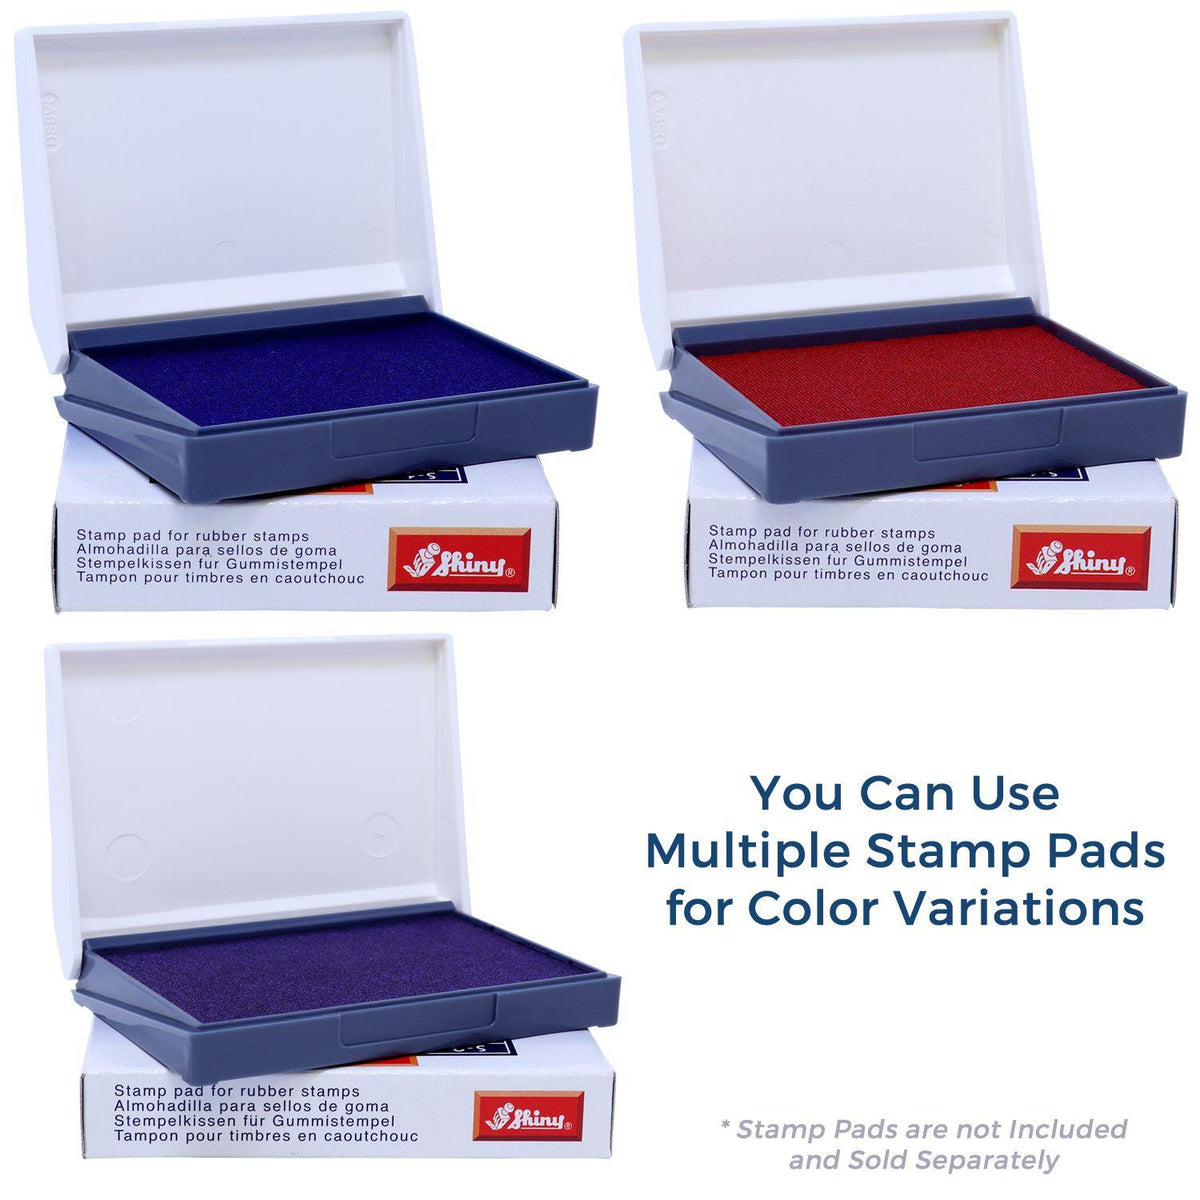 Stamp Pads for Fax It 2 Rubber Stamp Available